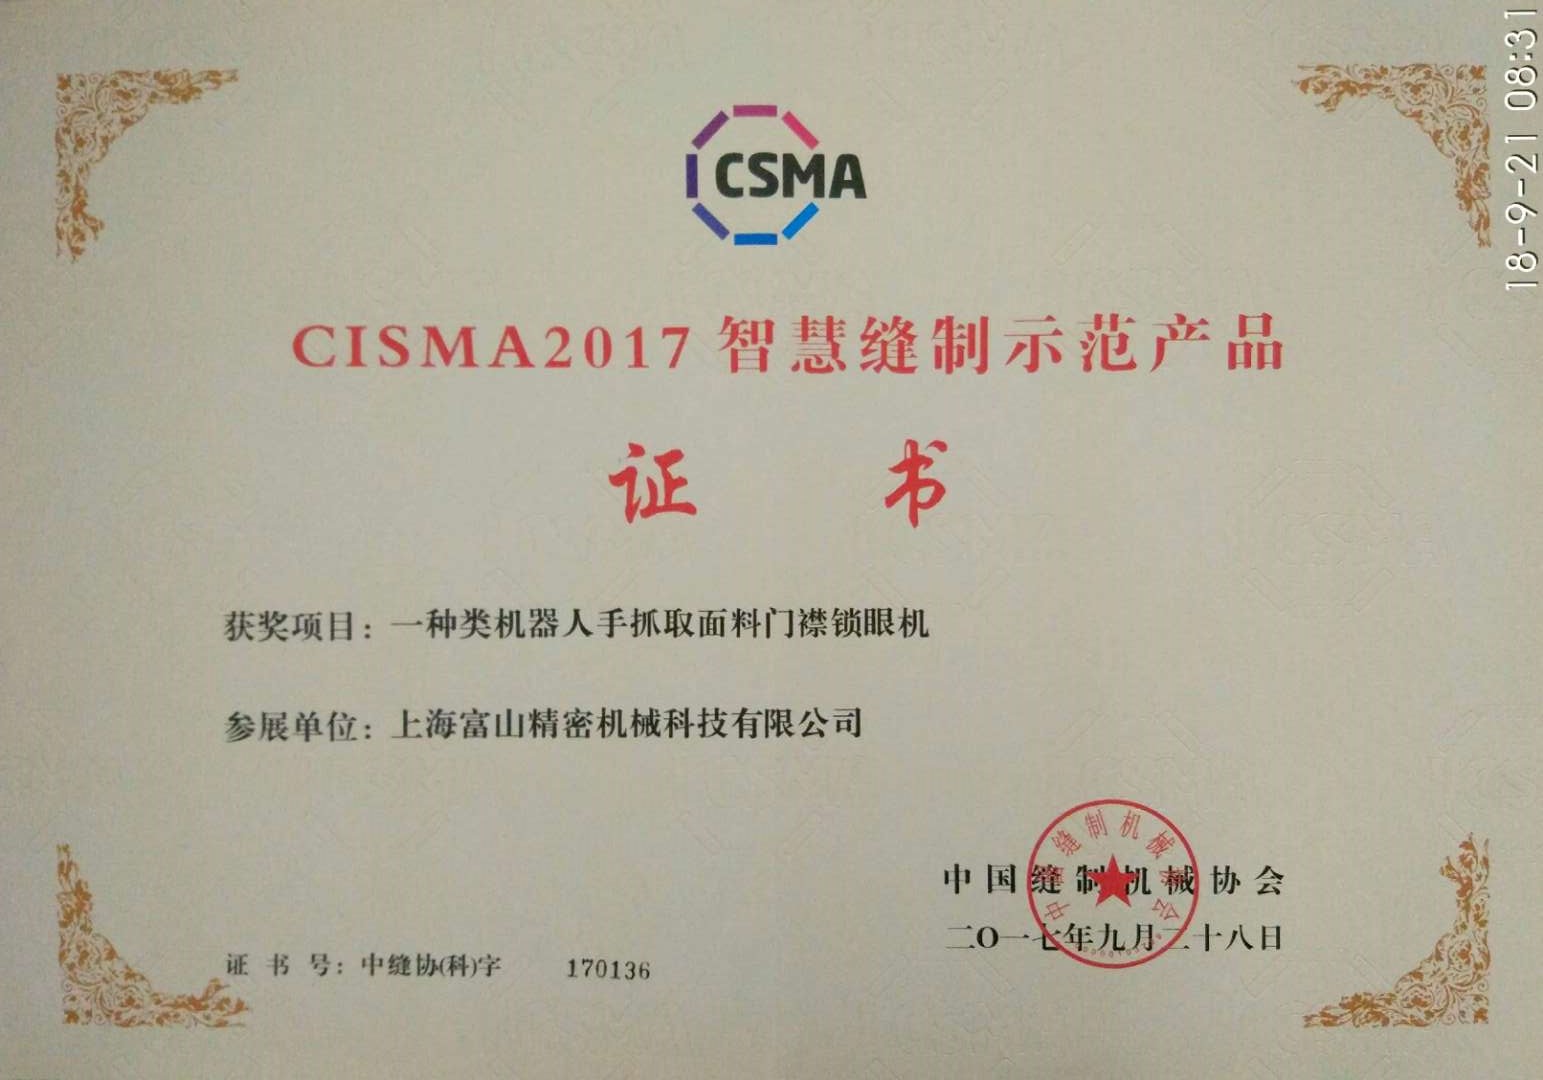 CISMA 2017 Smart Sewing Demonstration Products